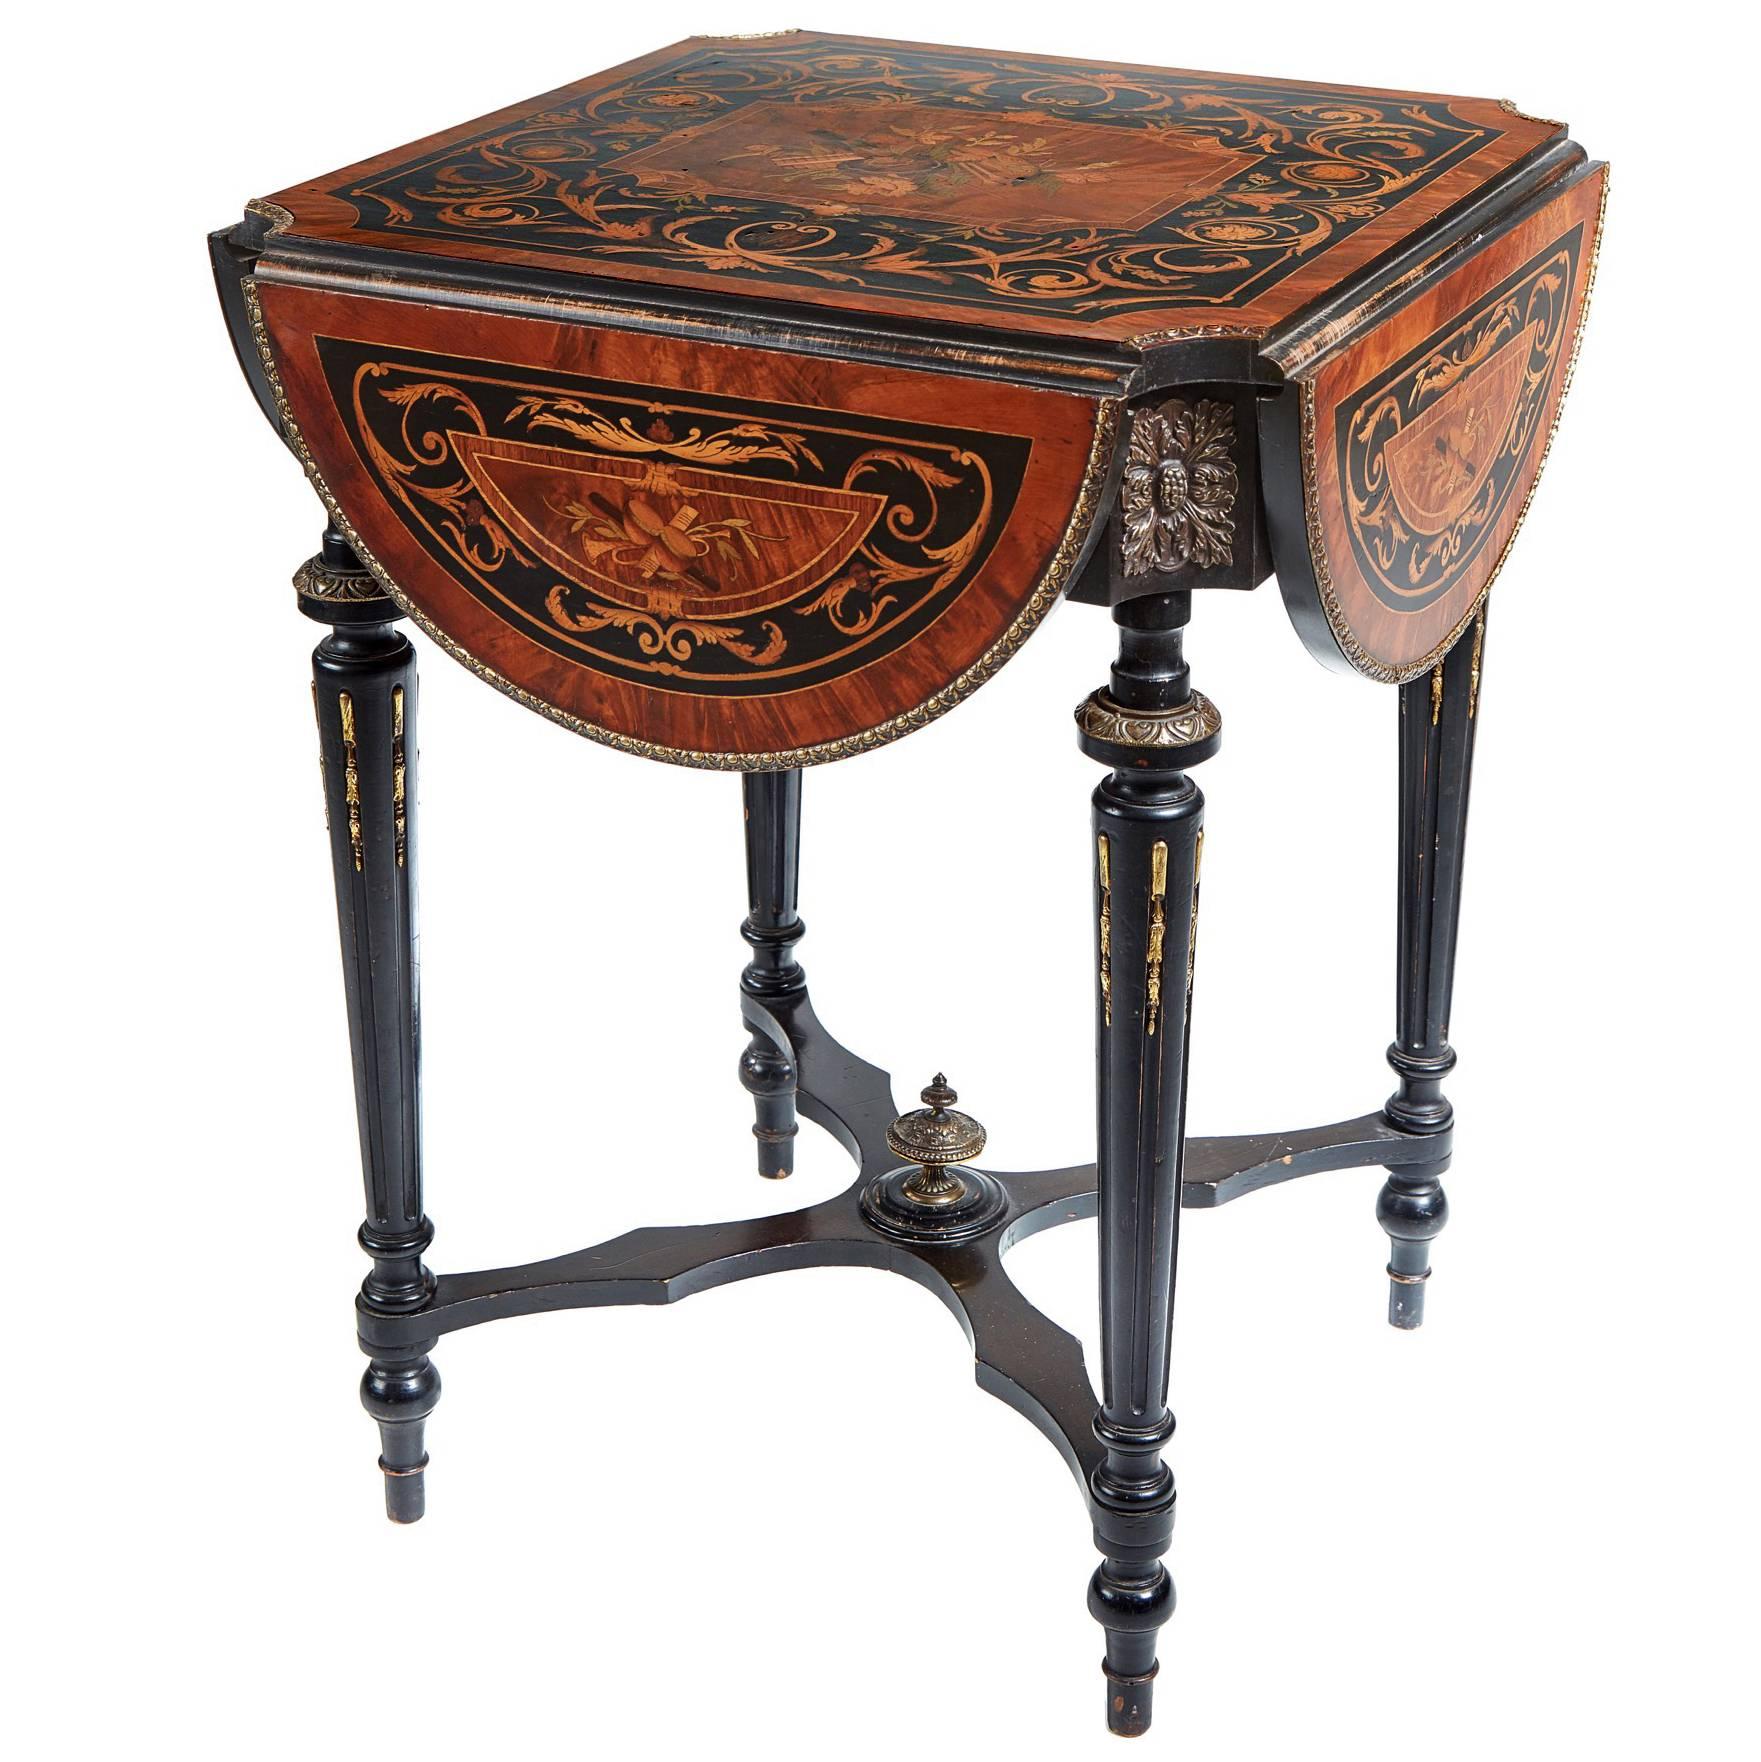 19th Century French Marquetry Inlaid Drop-Leaf Table